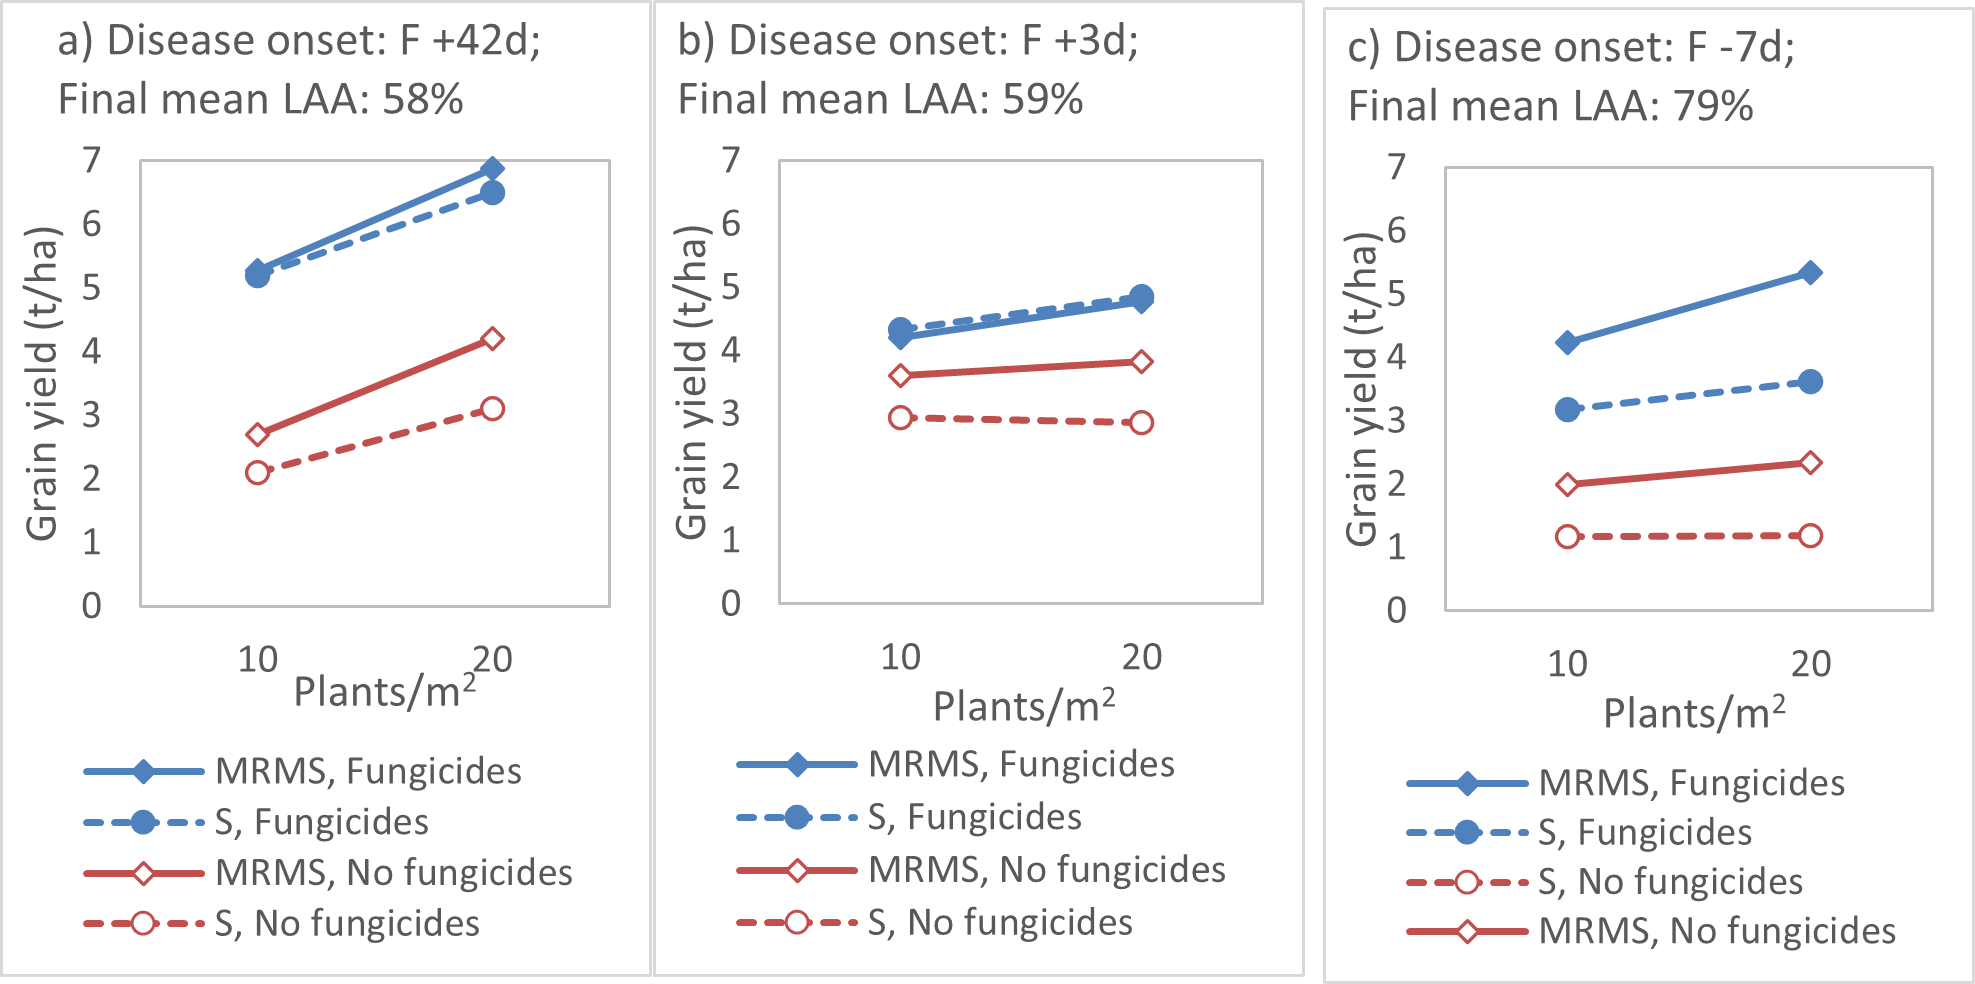 The effects of plant density, cultivar disease rating to chocolate spot (MRMS “Moderately Resistant Moderately Susceptible”, PBA Amberley , or S “Susceptible”, PBA Bendoc ) and the use of fungicides on faba bean grain yield in three experiments contrasting in the onset of disease (Flowering “F” + number of days) and the mean final severity of disease (LAA “Leaf area affected”). a) Vite Vite North, VIC, 2021, b) Lake Bolac, VIC, 2020, c) Tarrington, VIC, 2020.